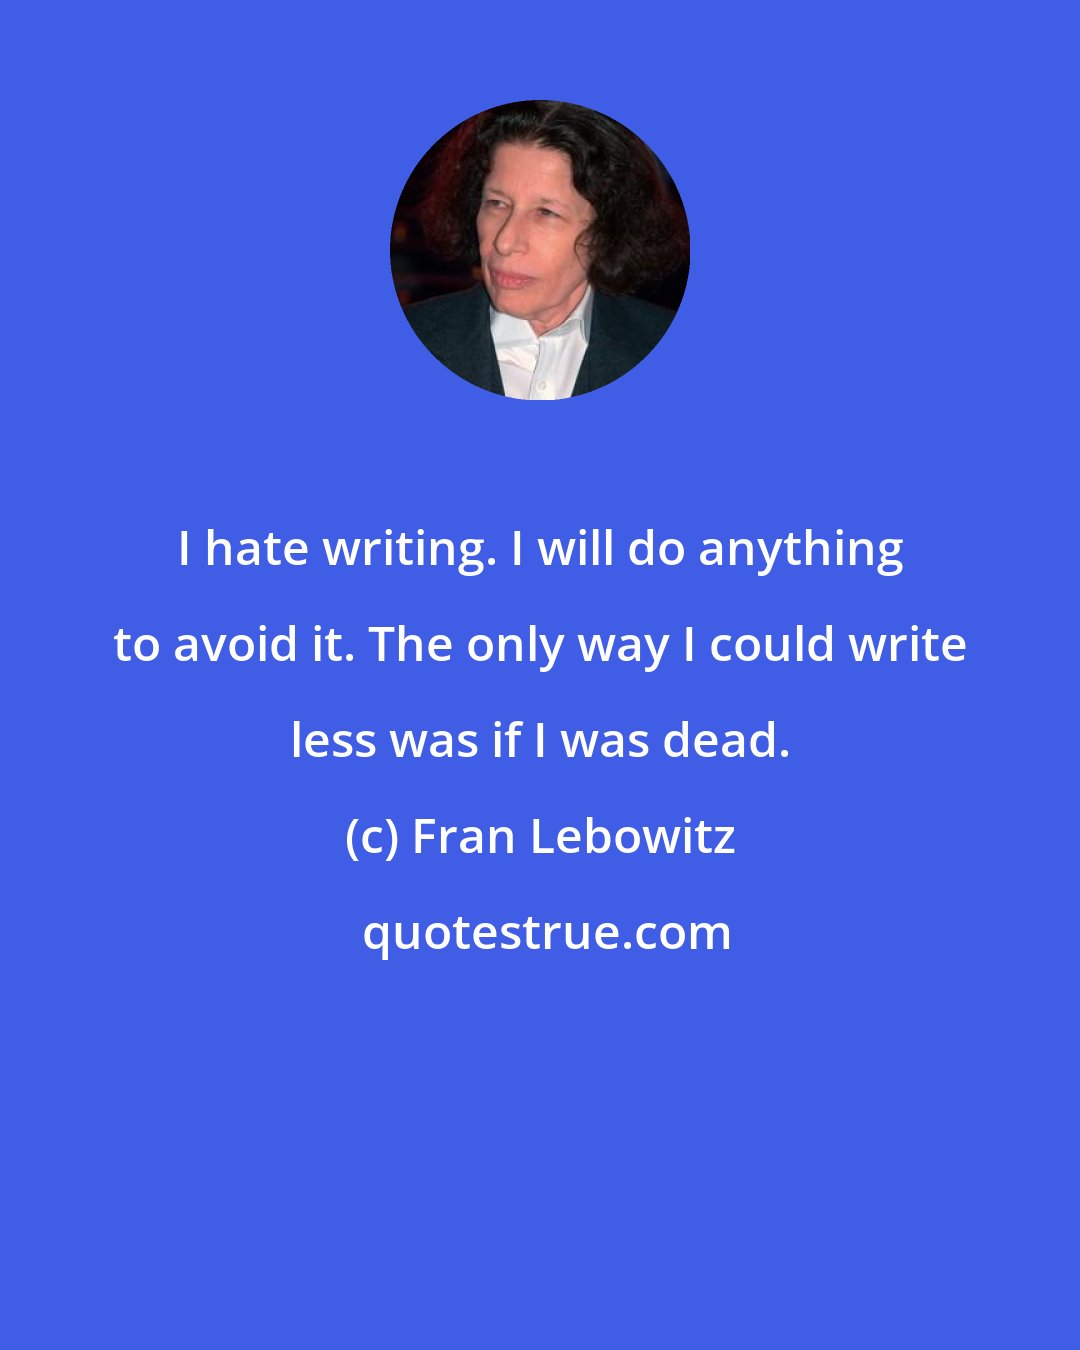 Fran Lebowitz: I hate writing. I will do anything to avoid it. The only way I could write less was if I was dead.